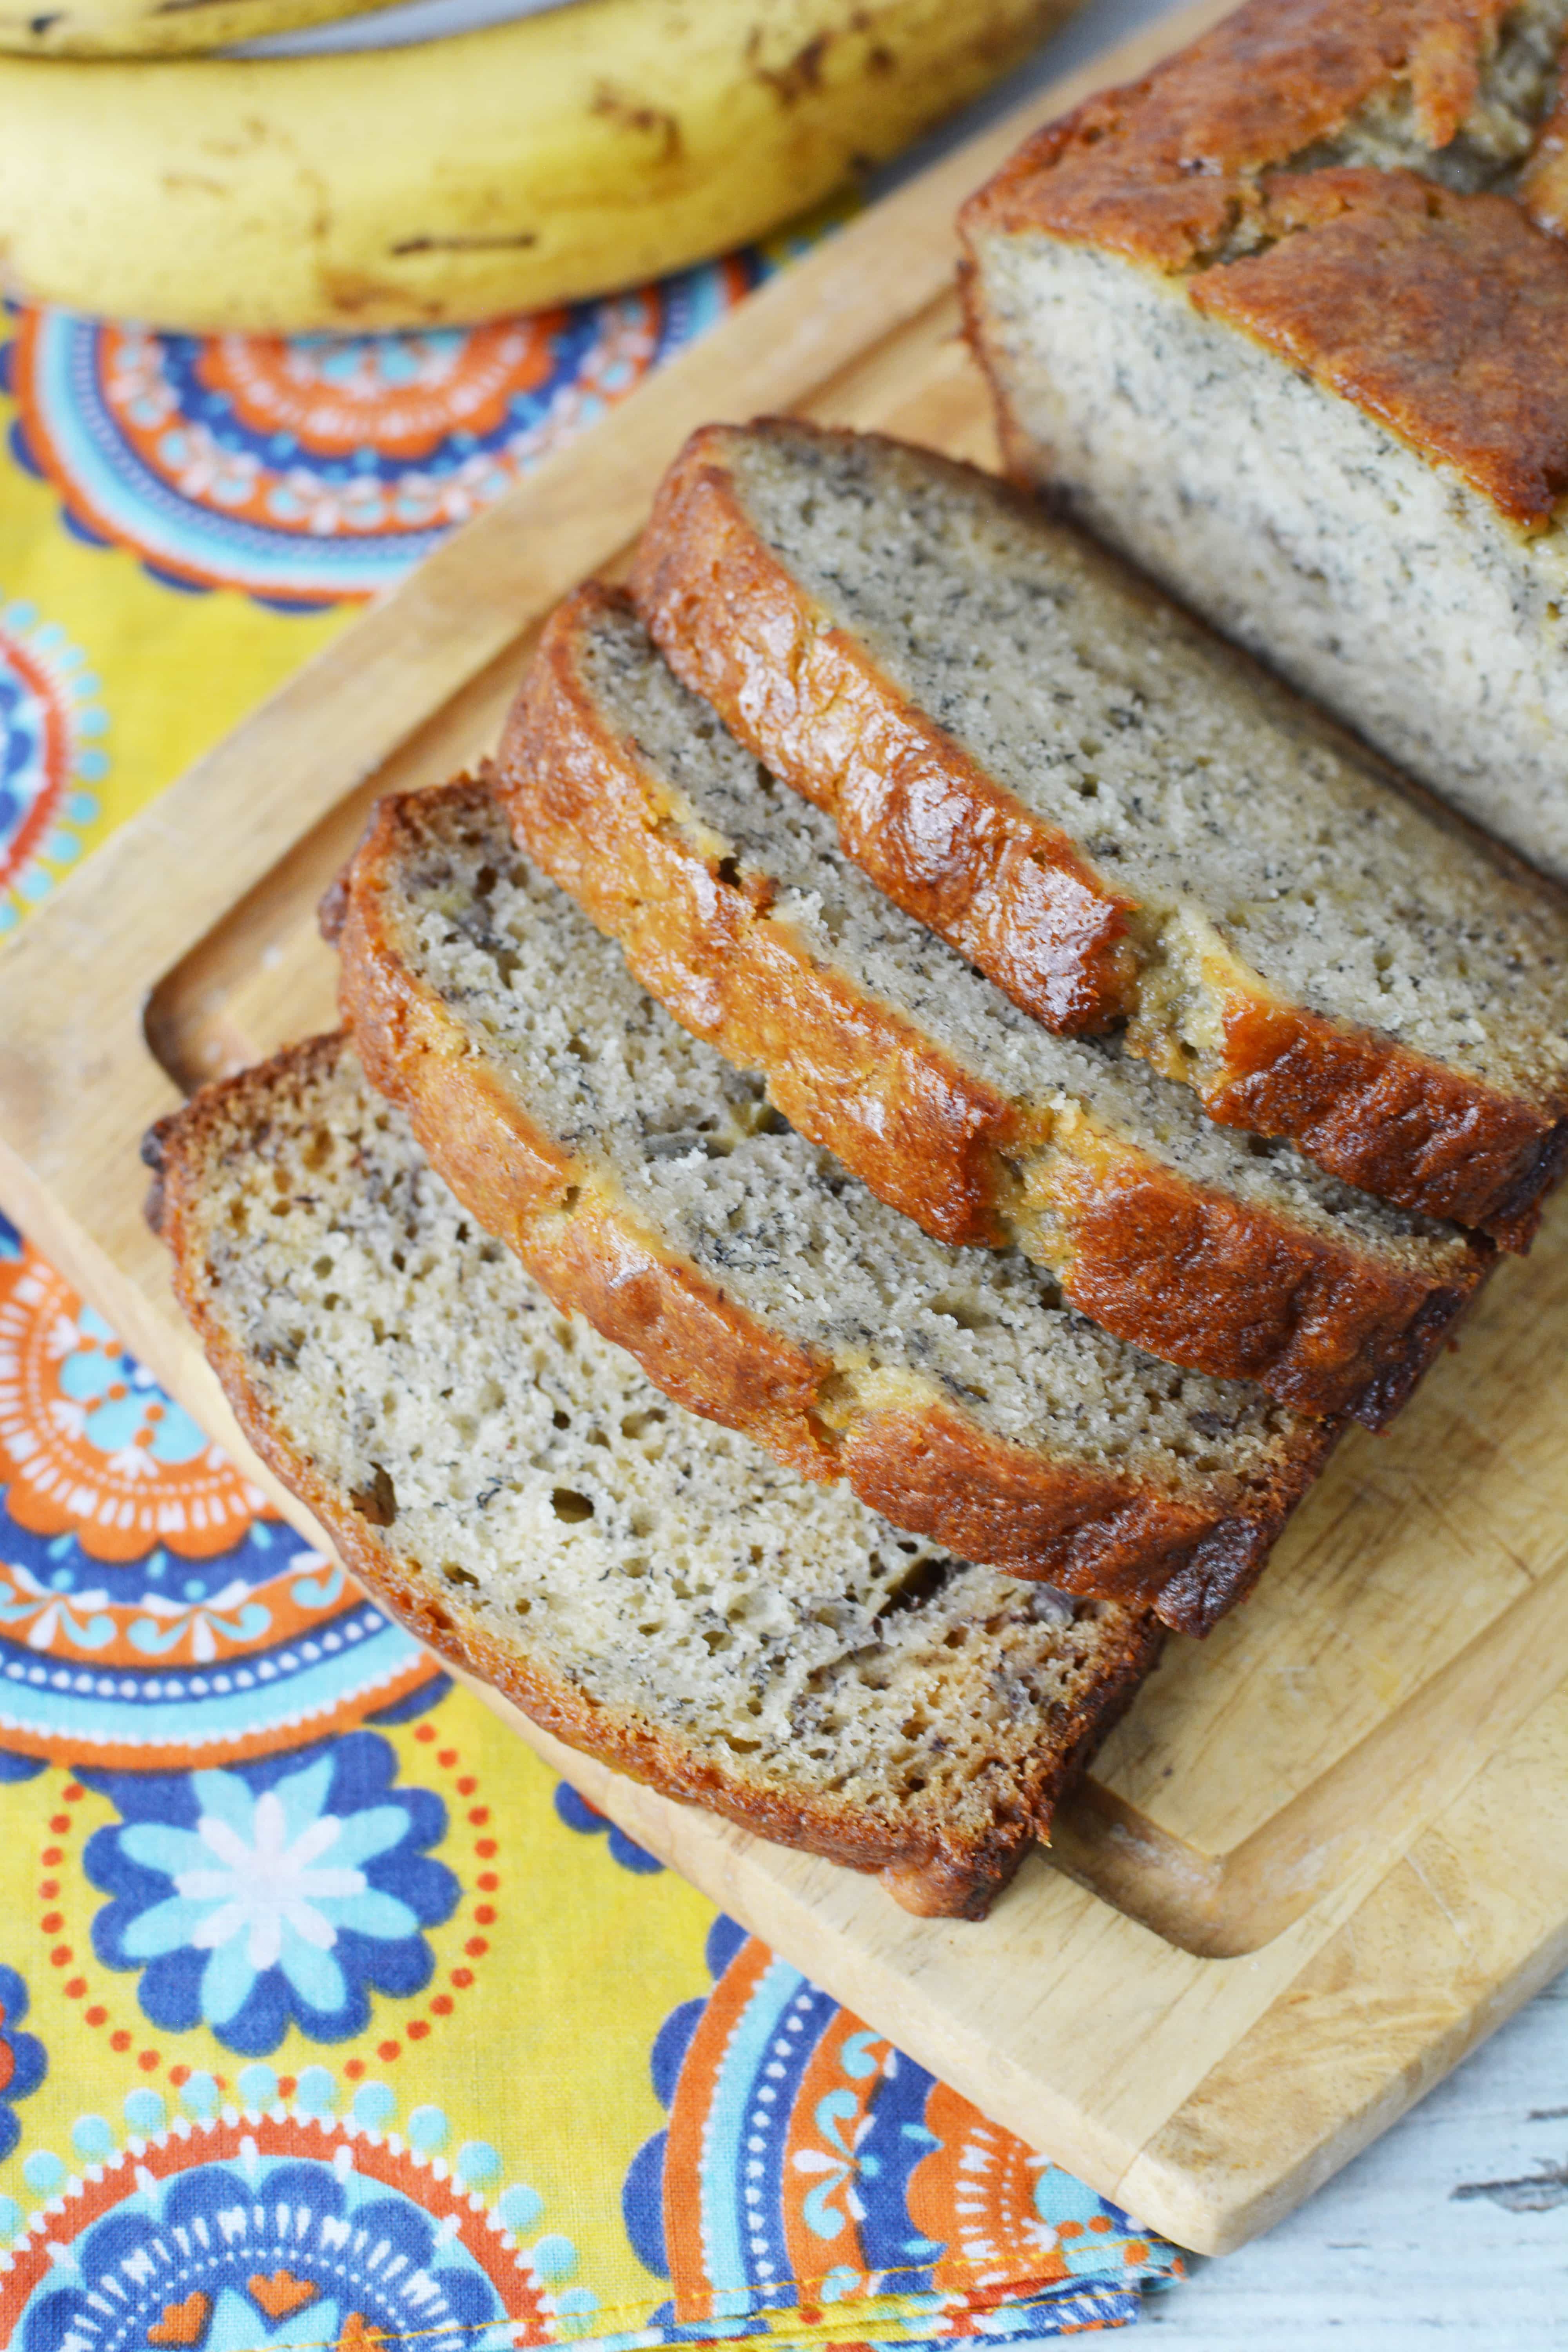 banana bread recipe 5 ingredients This! 41+ facts about banana bread recipehhhhhhhhhh? maybe you would